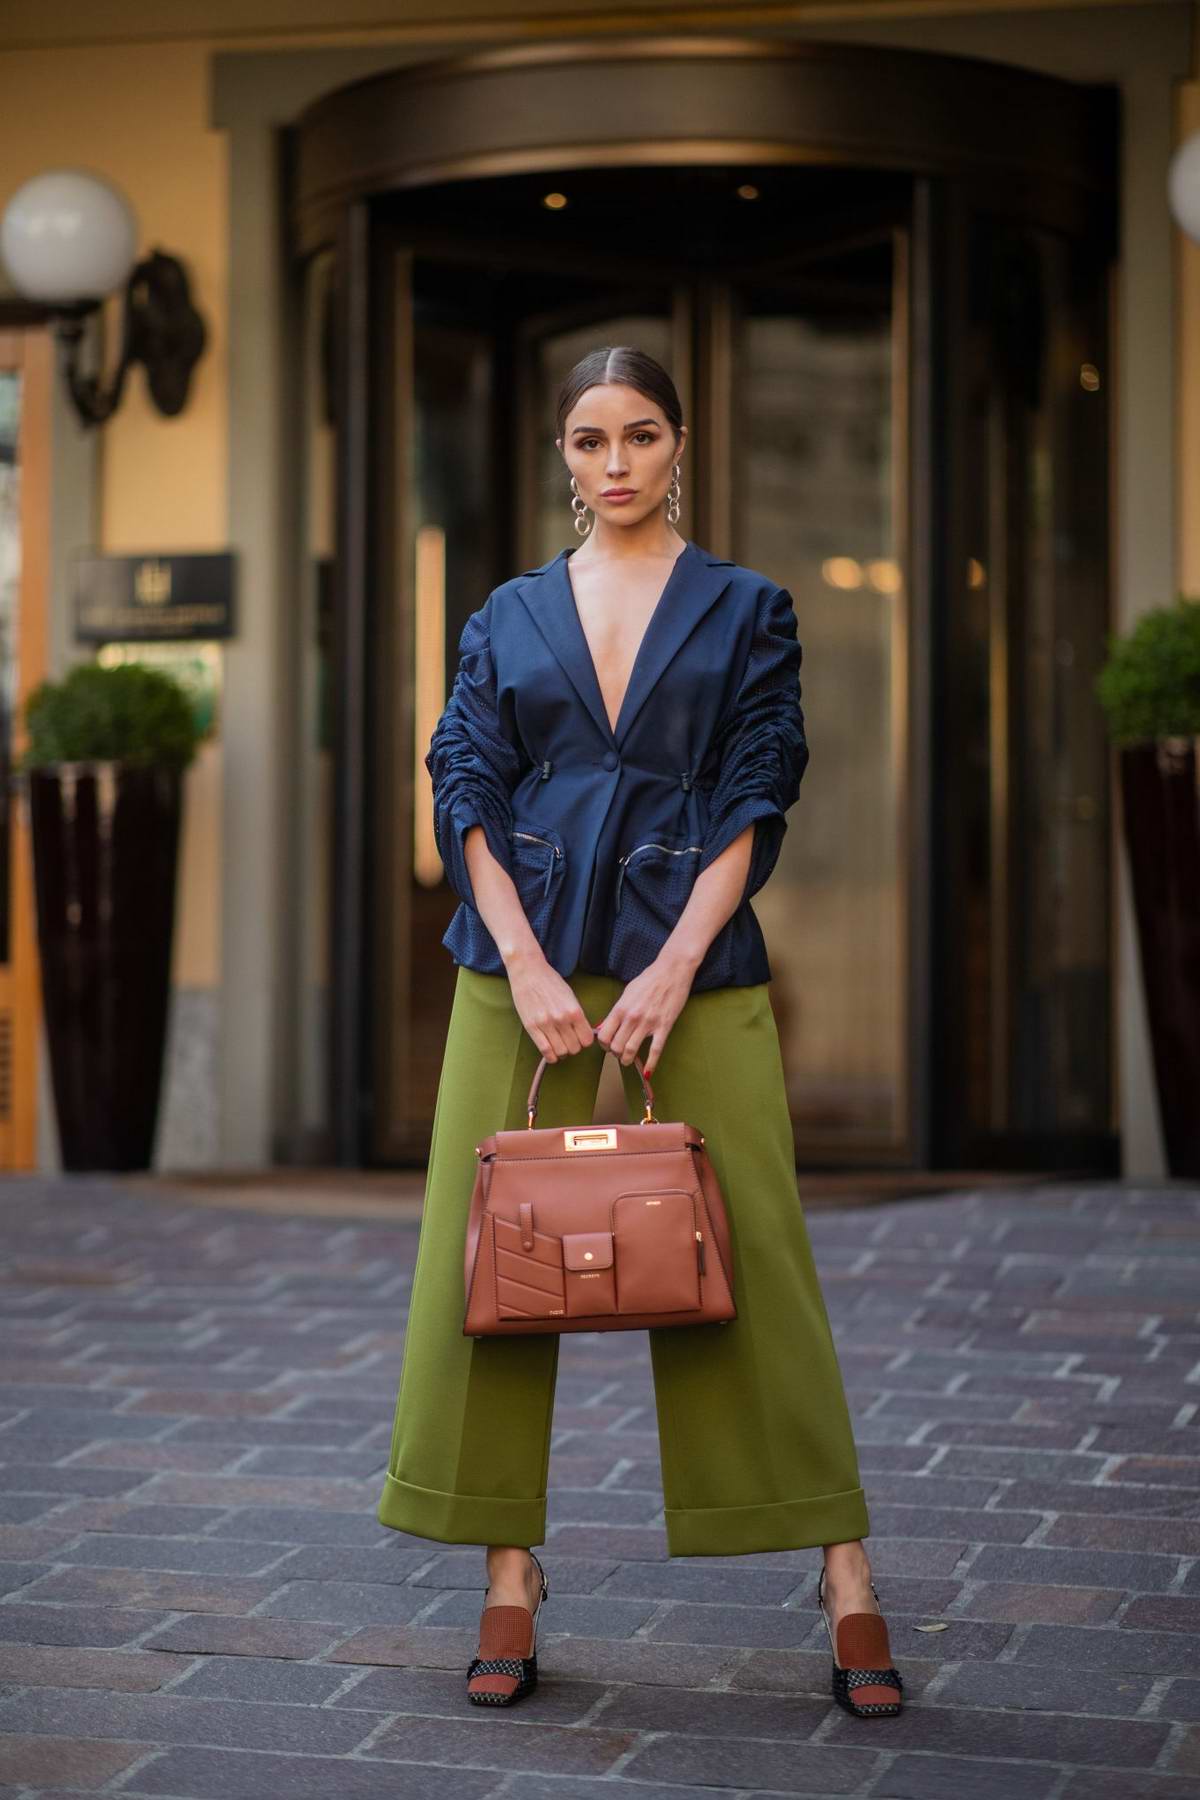 Olivia Culpo shows off her chic style in a blue blazer and rolled-up lime- green